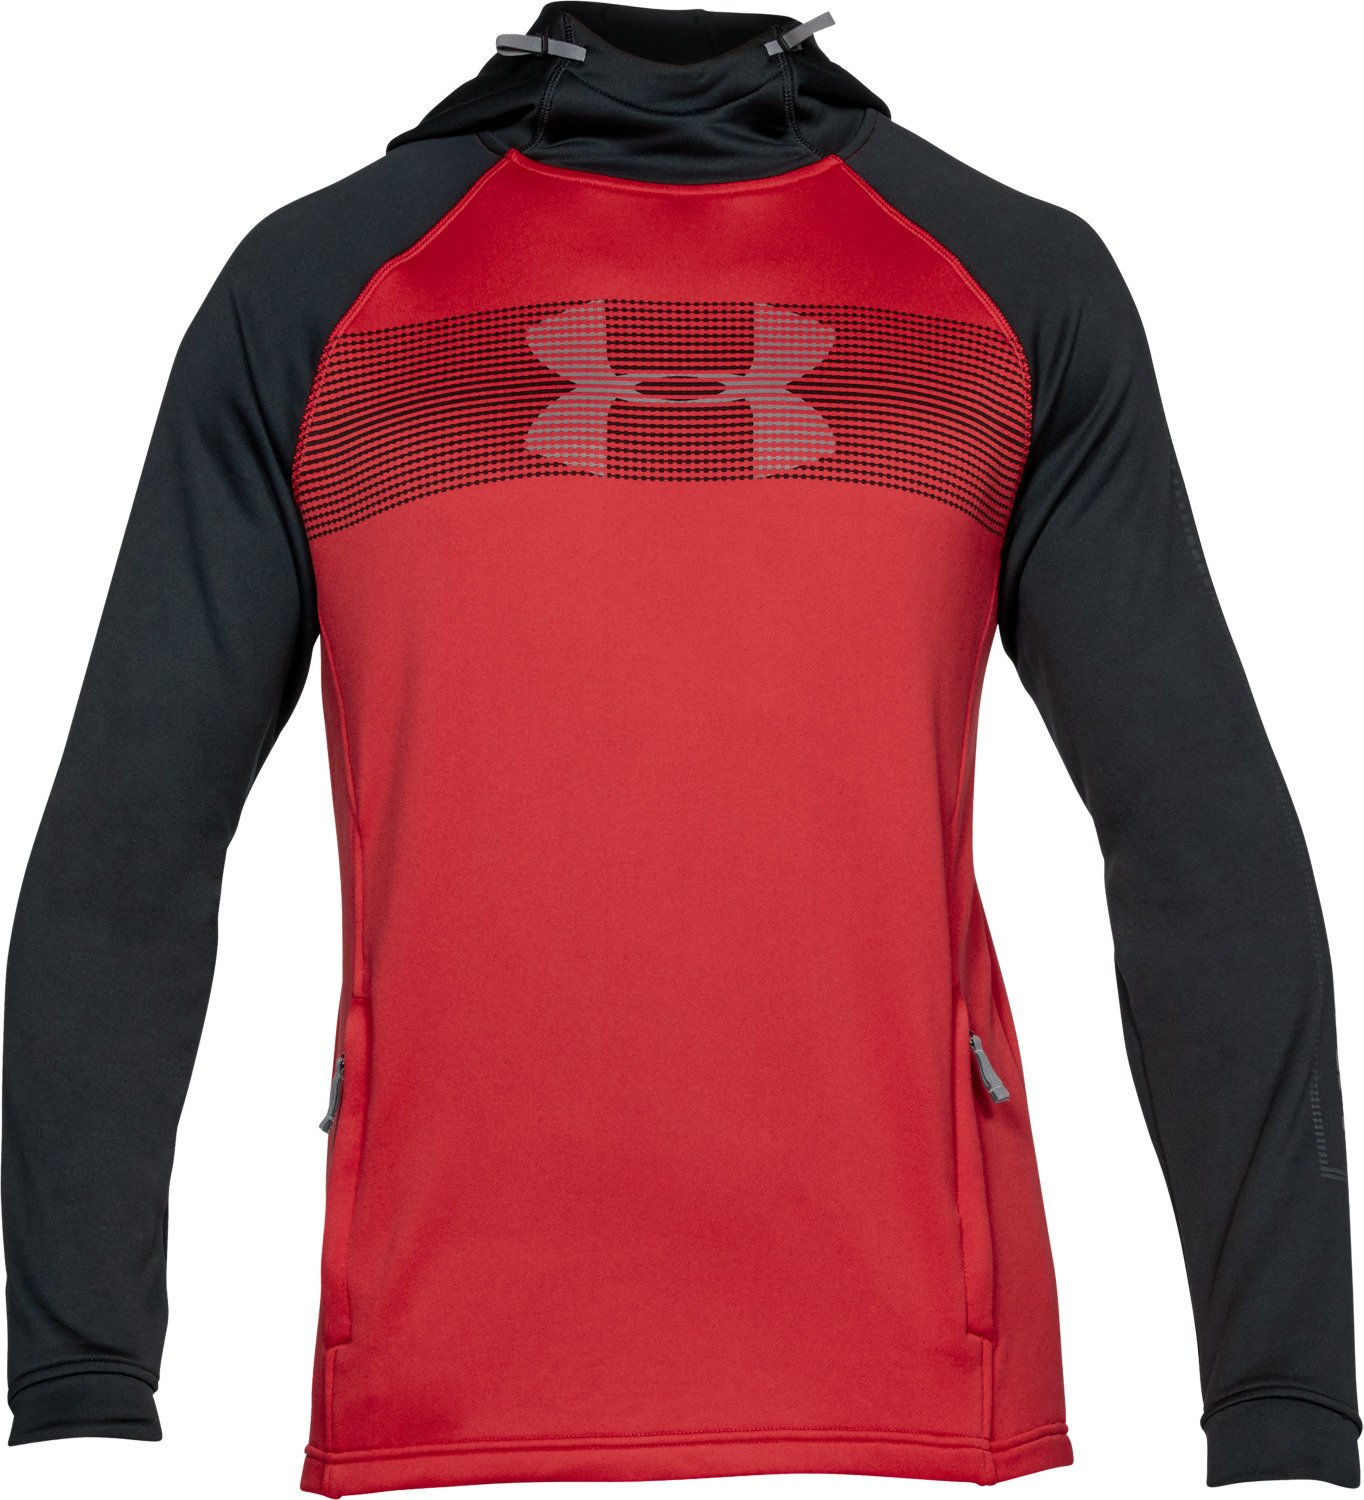 Cheap under armour academy color Buy Online >OFF59% Discounted